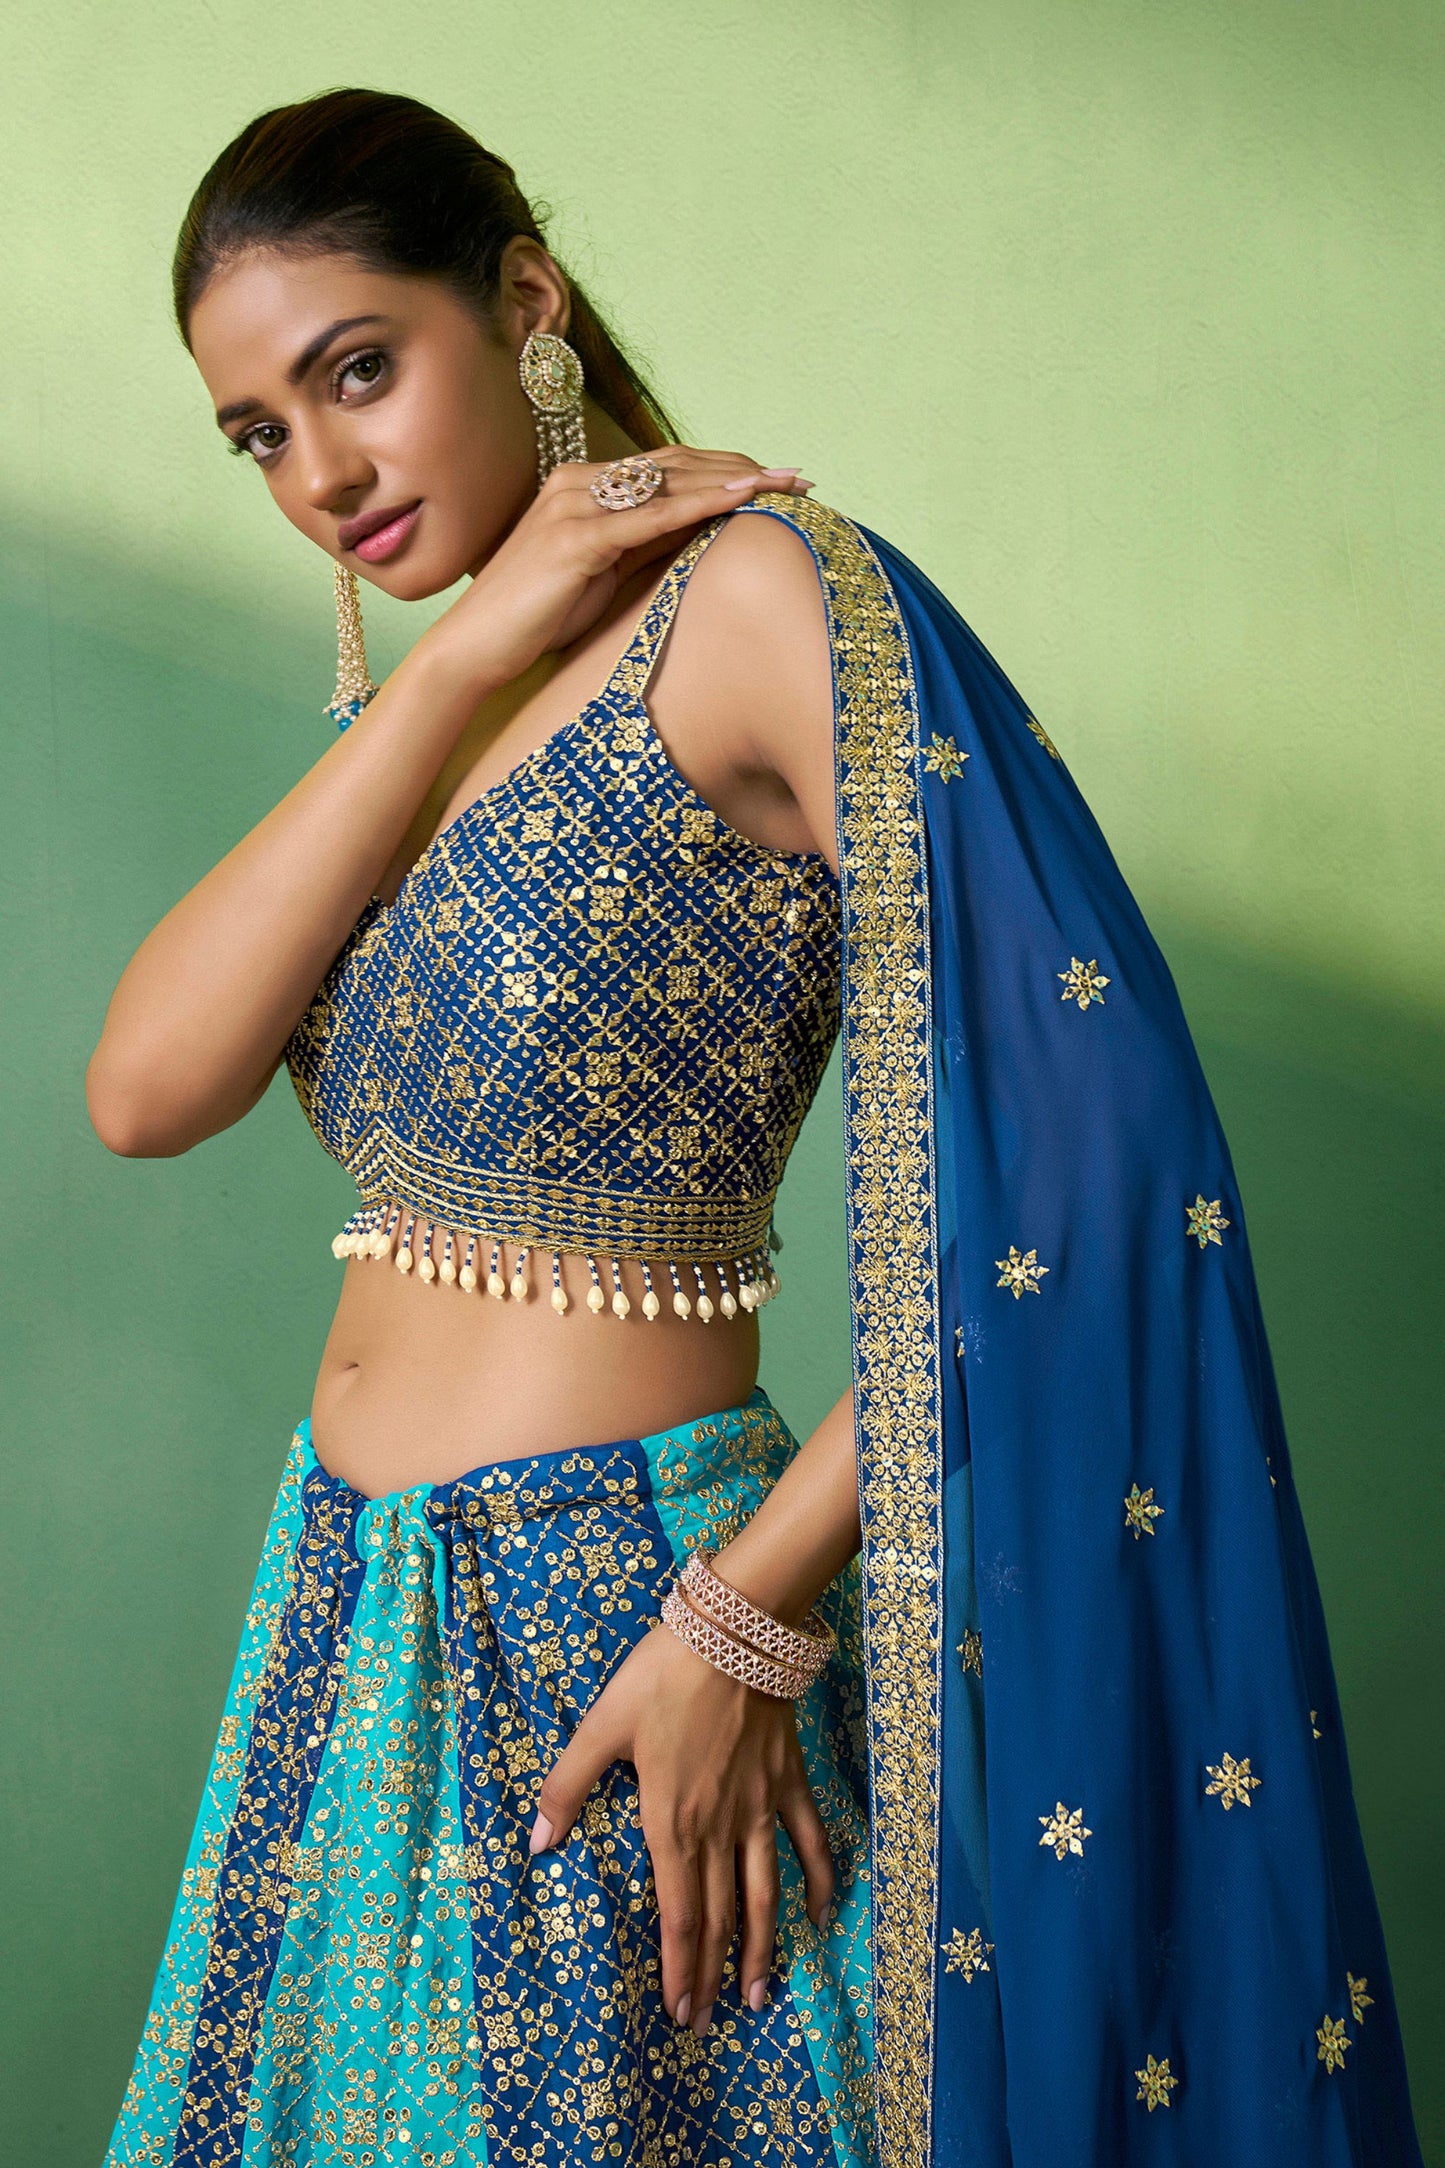 Blue Pakistani Georgette Lehenga Choli For Indian Festivals & Weddings - Sequence Embroidery Work, Thread Embroidery Work,